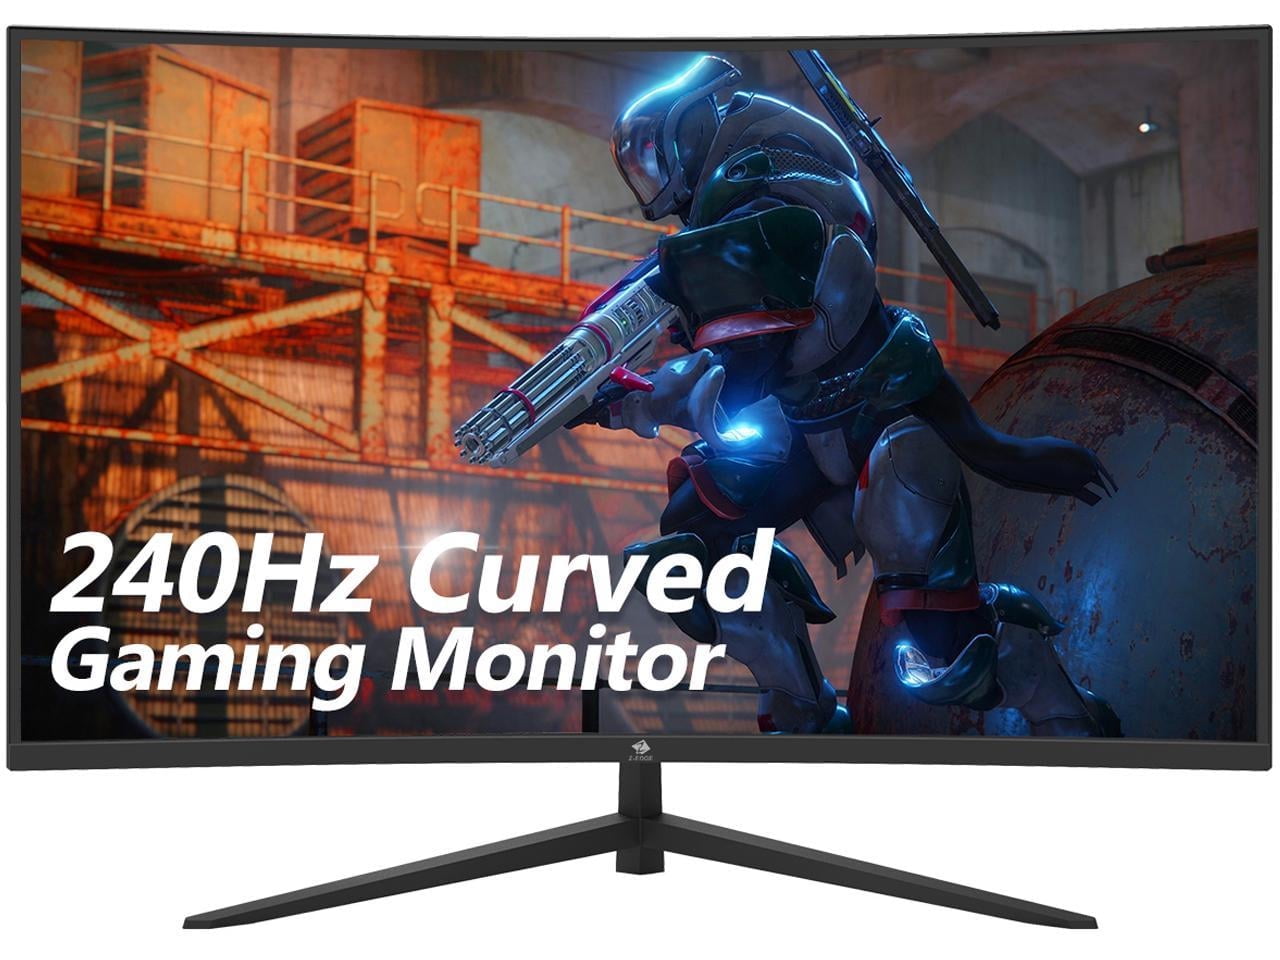 Pre-Owned Z-EDGE 32 inch Curved Gaming Monitor, 240Hz 1ms, FHD 1920x1080, HDR10, FreeSync, 2 x HDMI, 1 x DisplayPort, Built-in Speakers, Black